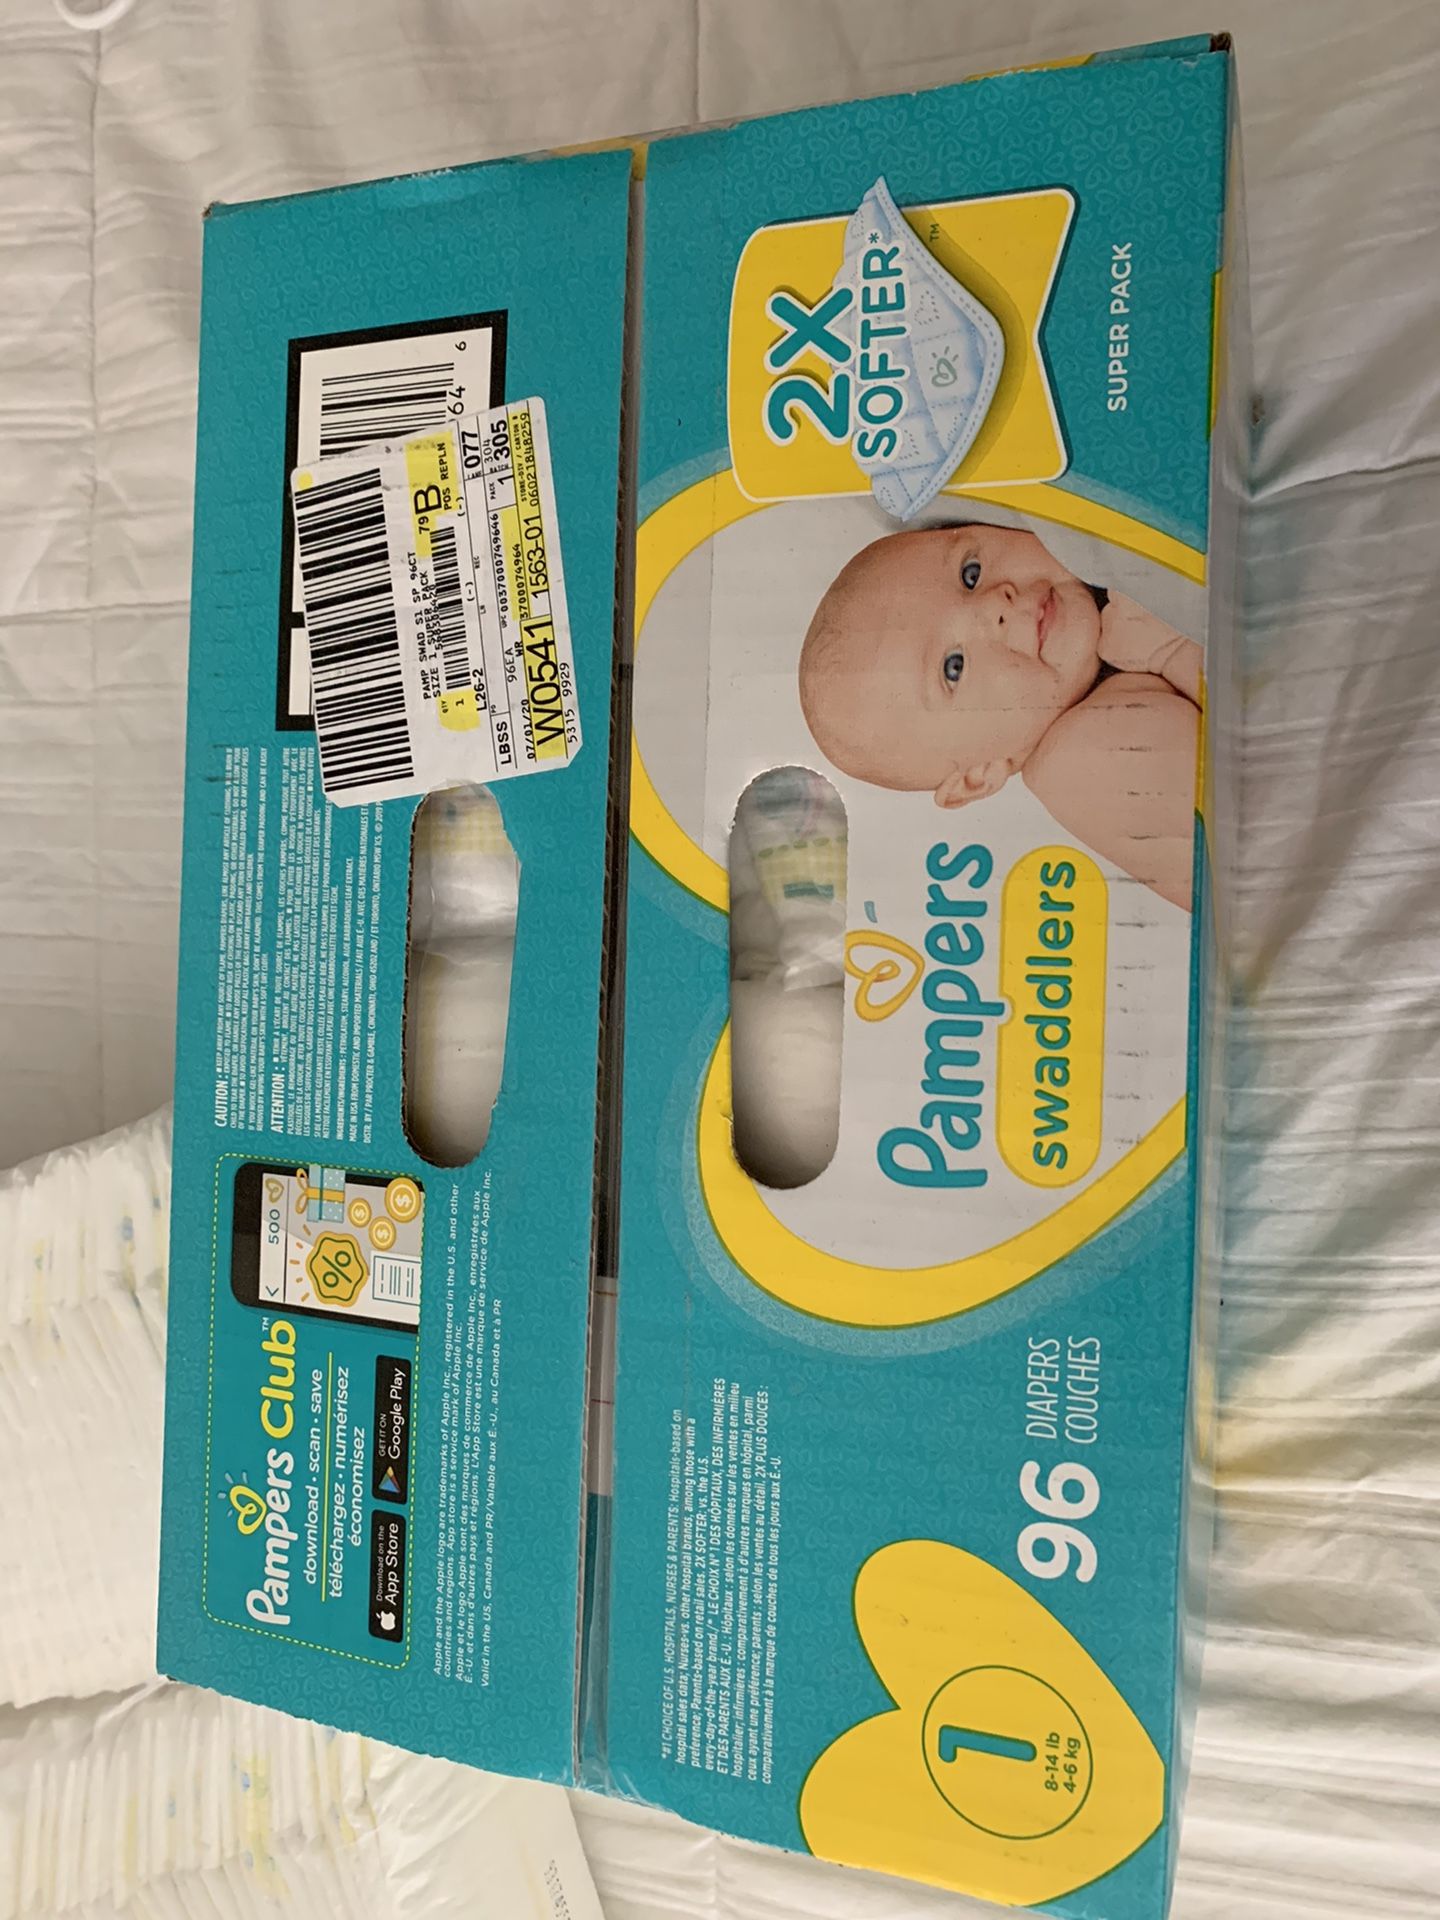 Brand new pack of SIZE 1 diapers + MORE